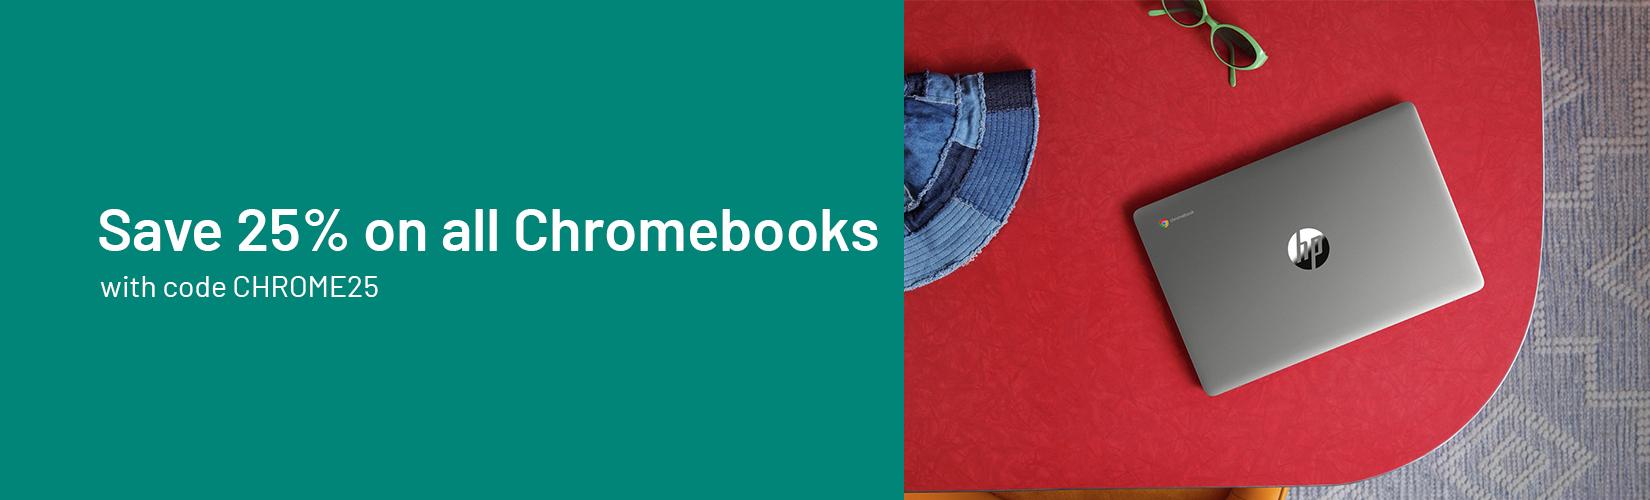 Save 25% on all Chromebooks with code CHROME25.